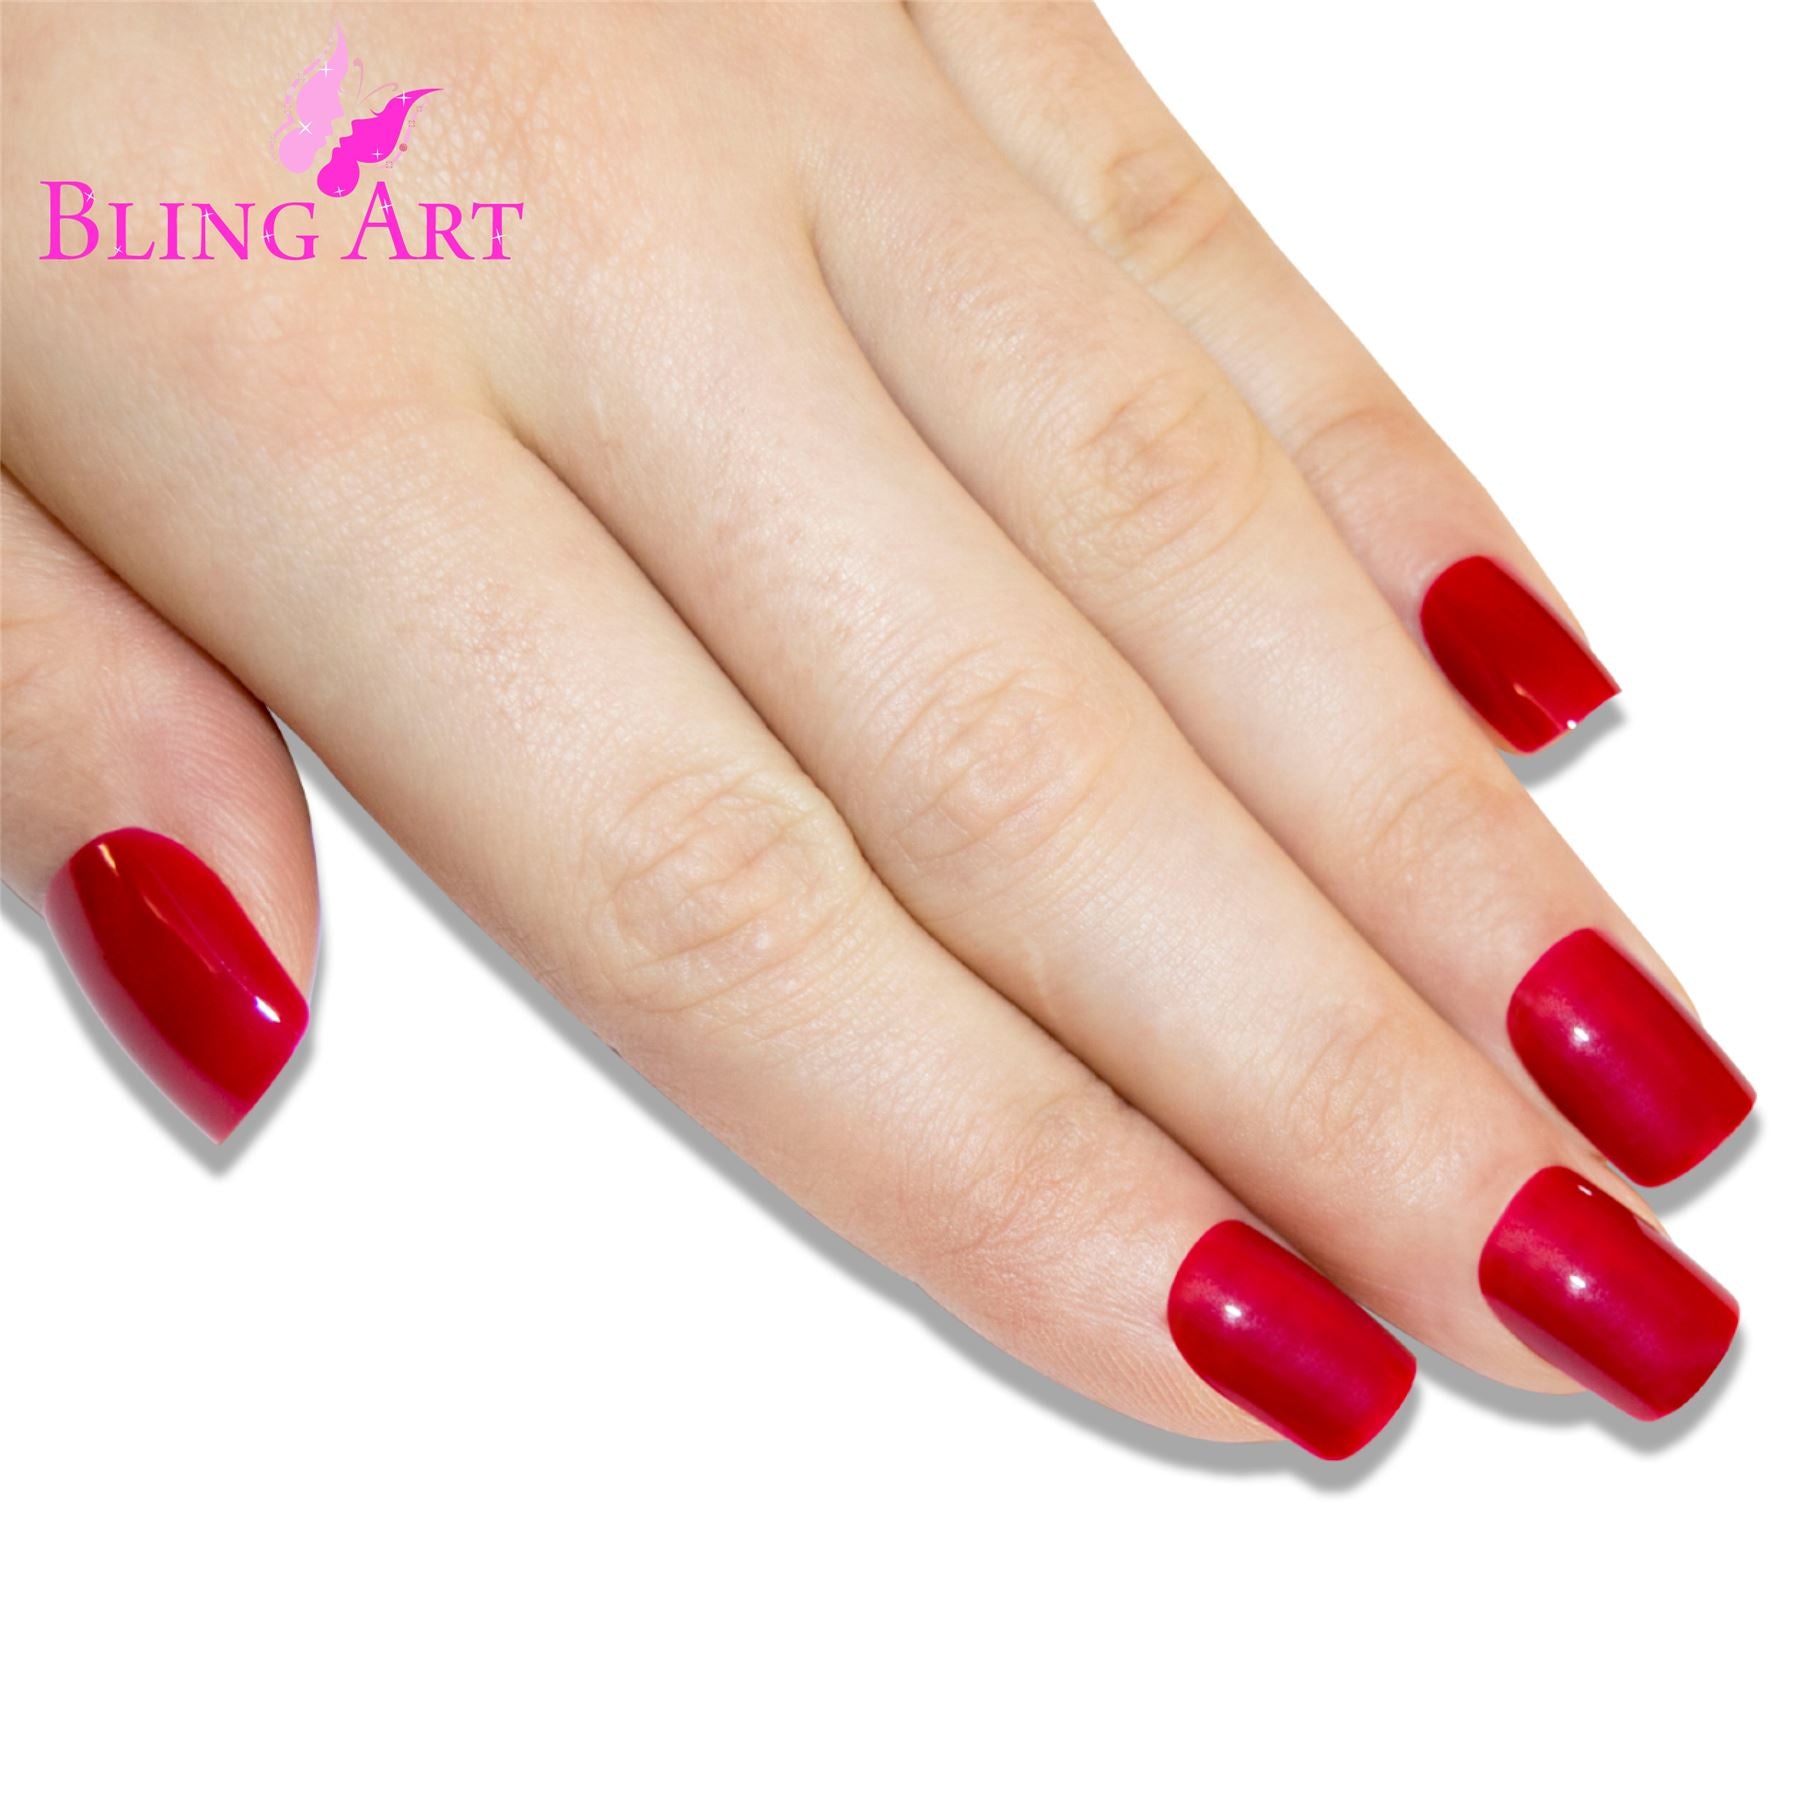 False Nails by Bling Art Red Polished French Manicure Fake Medium Tips with Glue